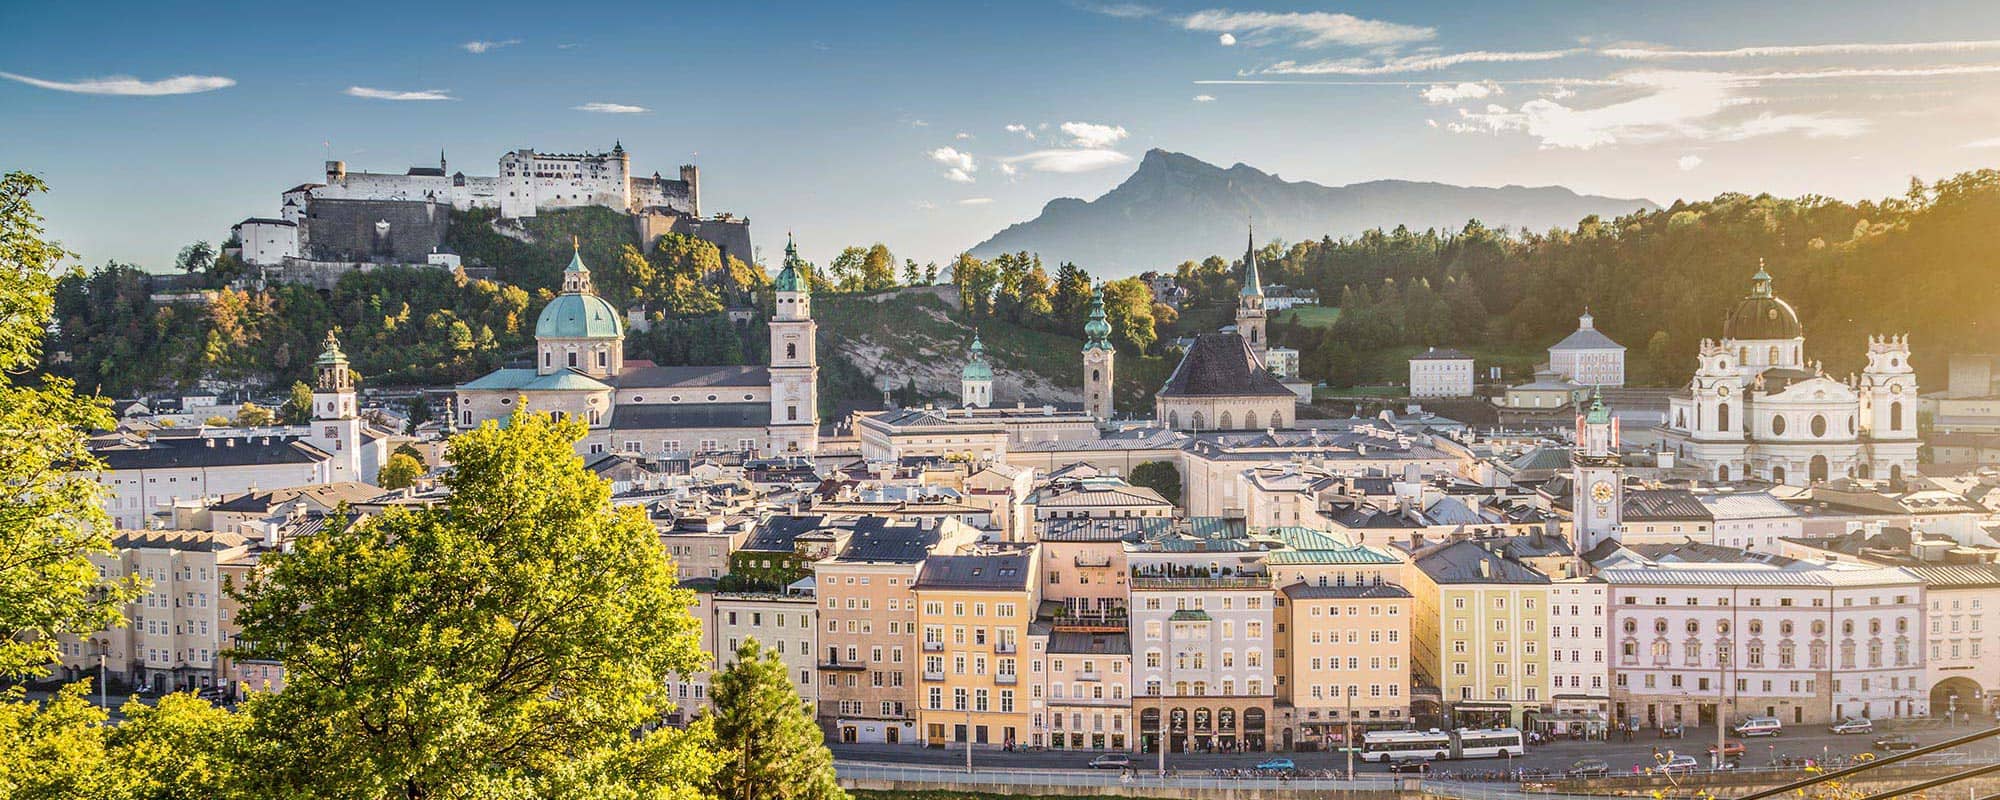 Search for an apartment in Salzburg with Denkstein Immobilien